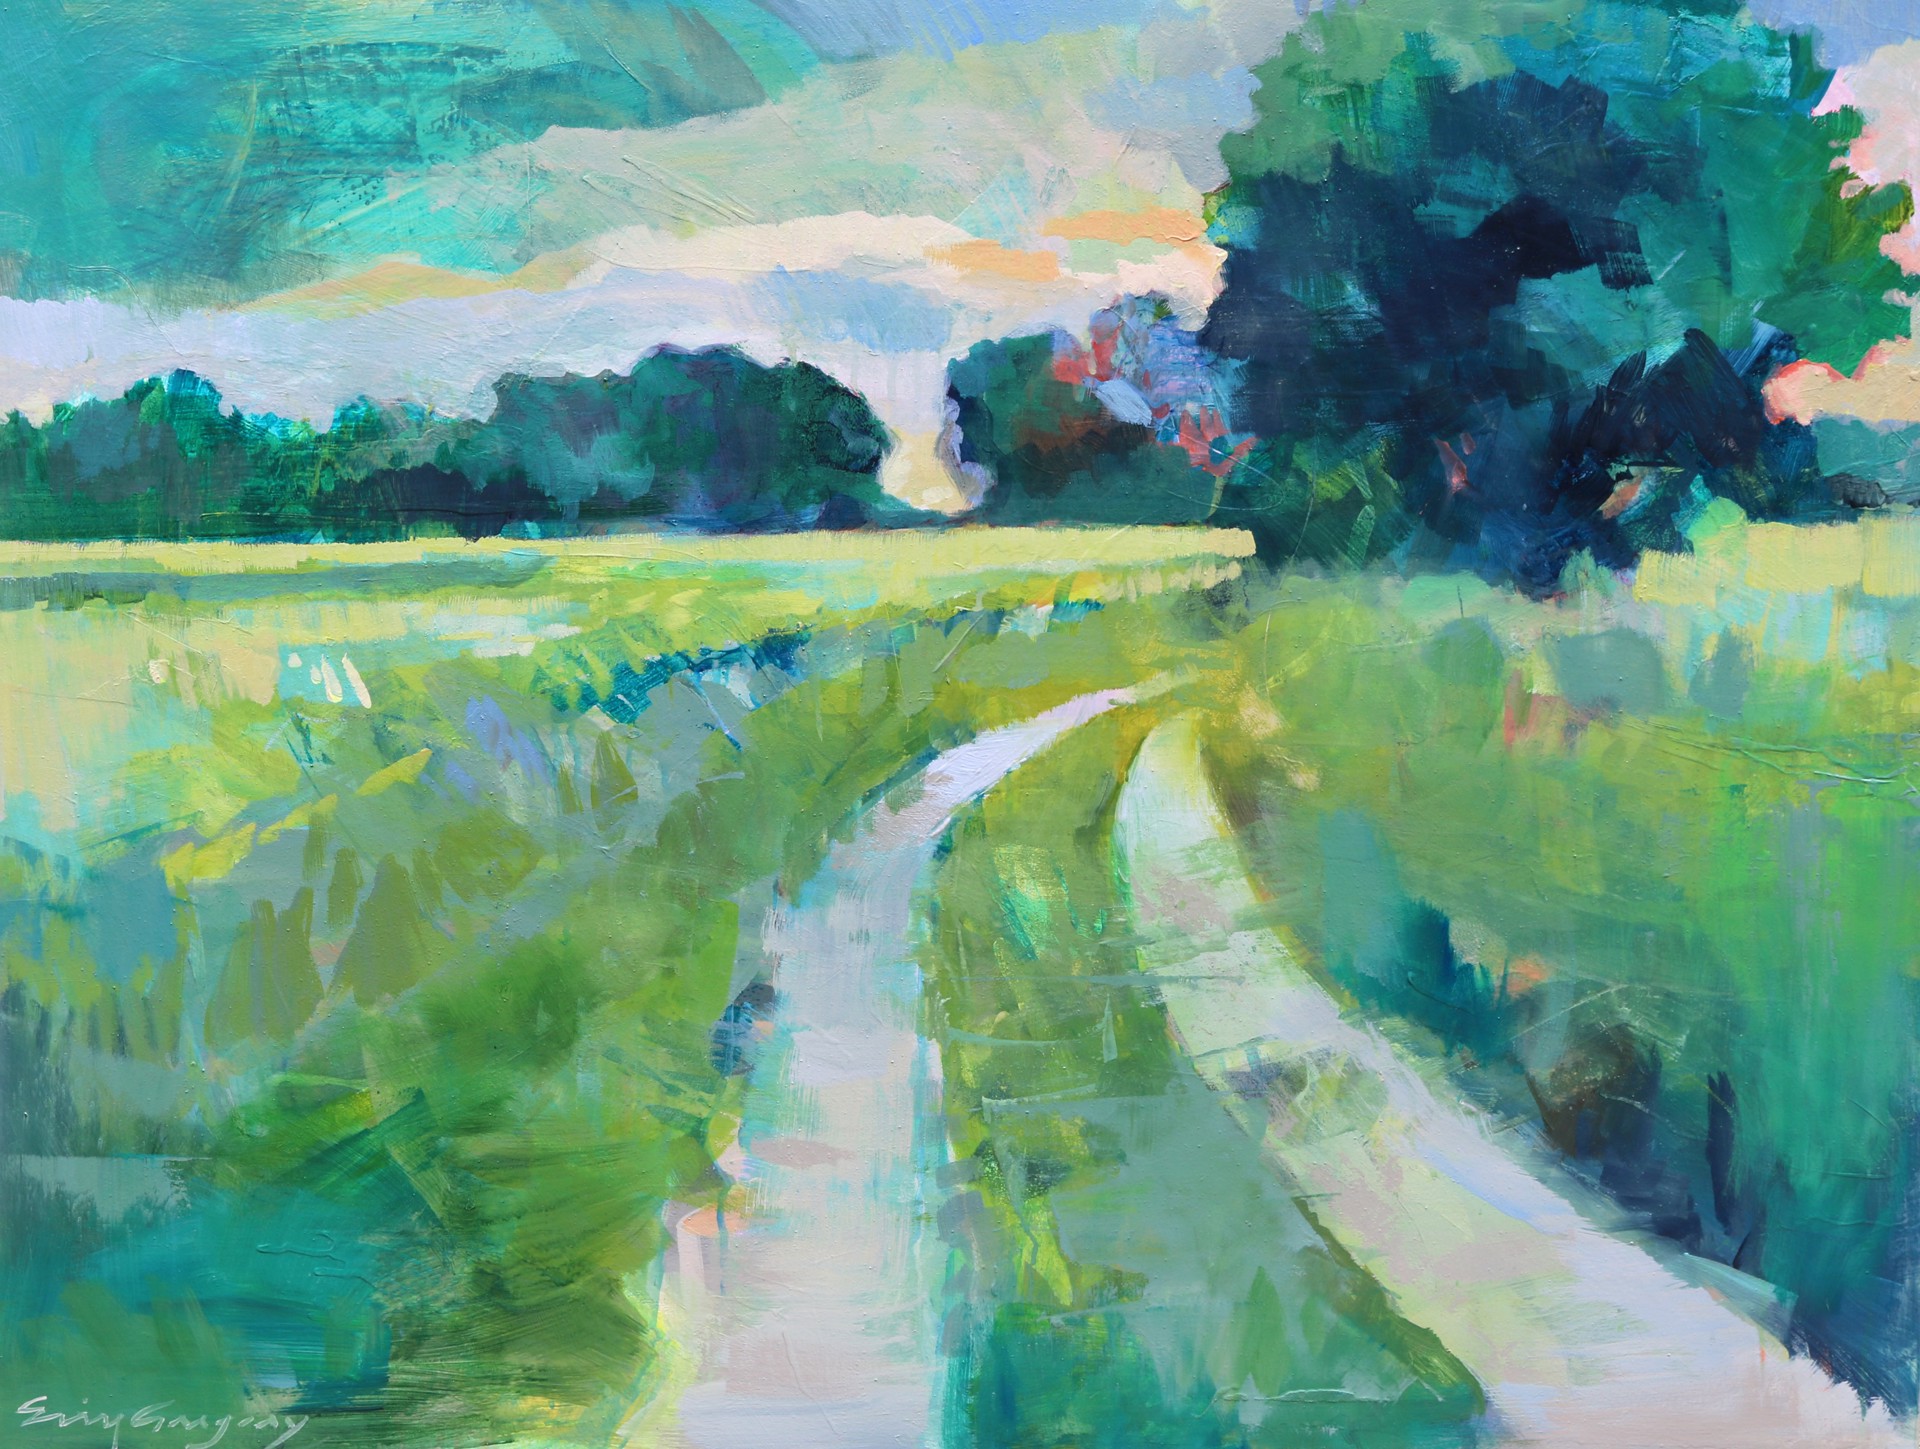 Wherever the Road Takes Us 1 {SOLD} by Erin Gregory